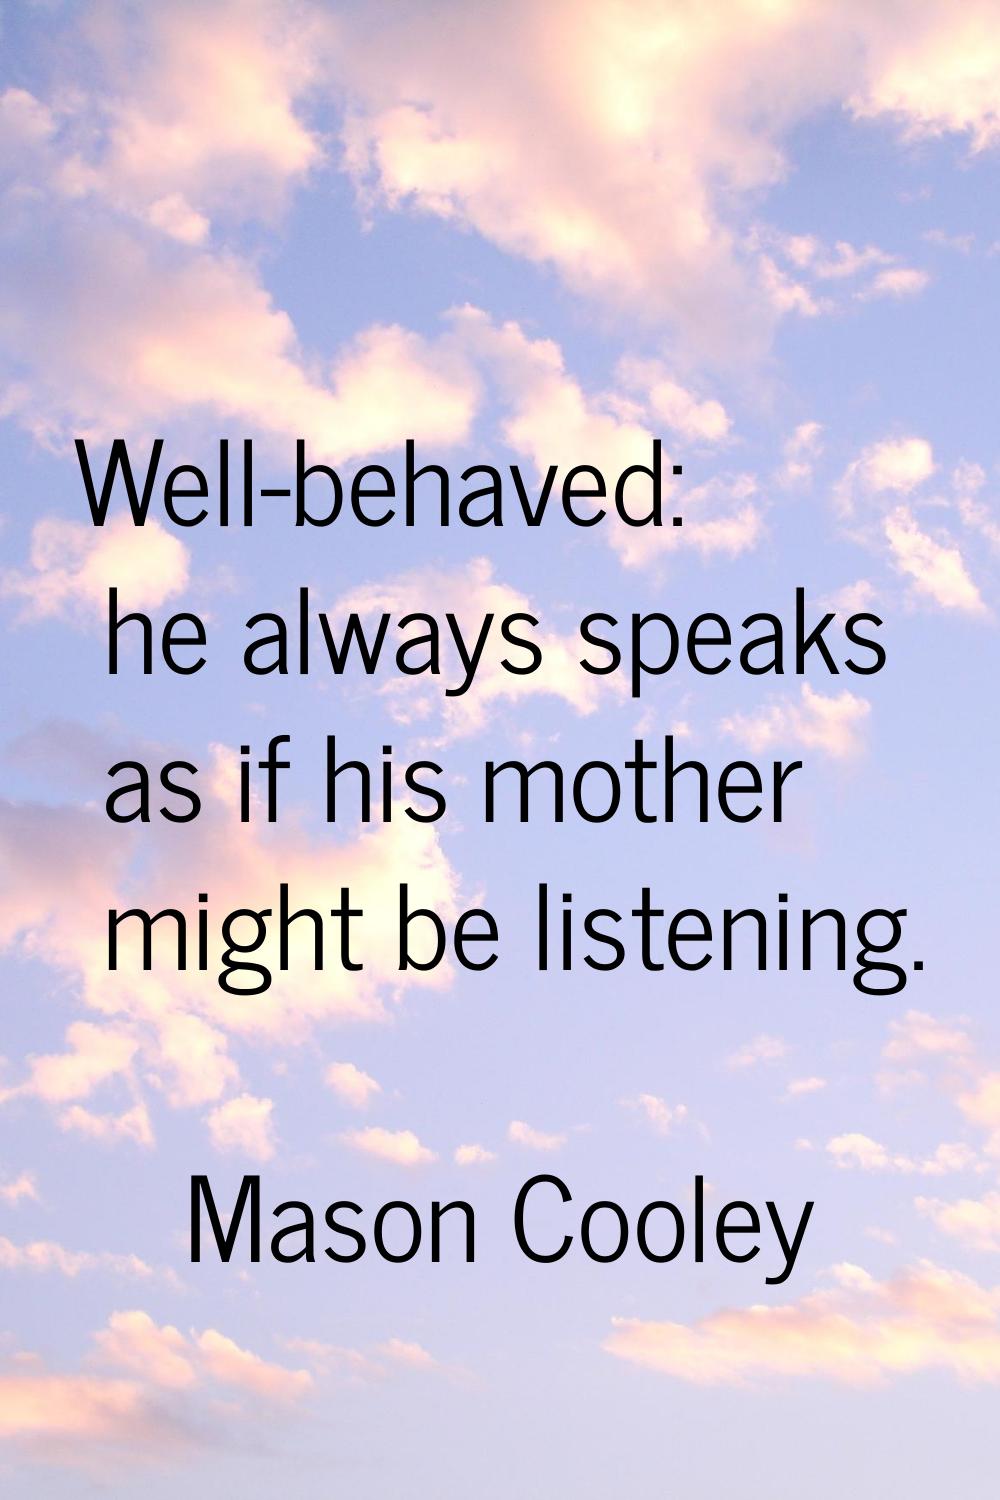 Well-behaved: he always speaks as if his mother might be listening.